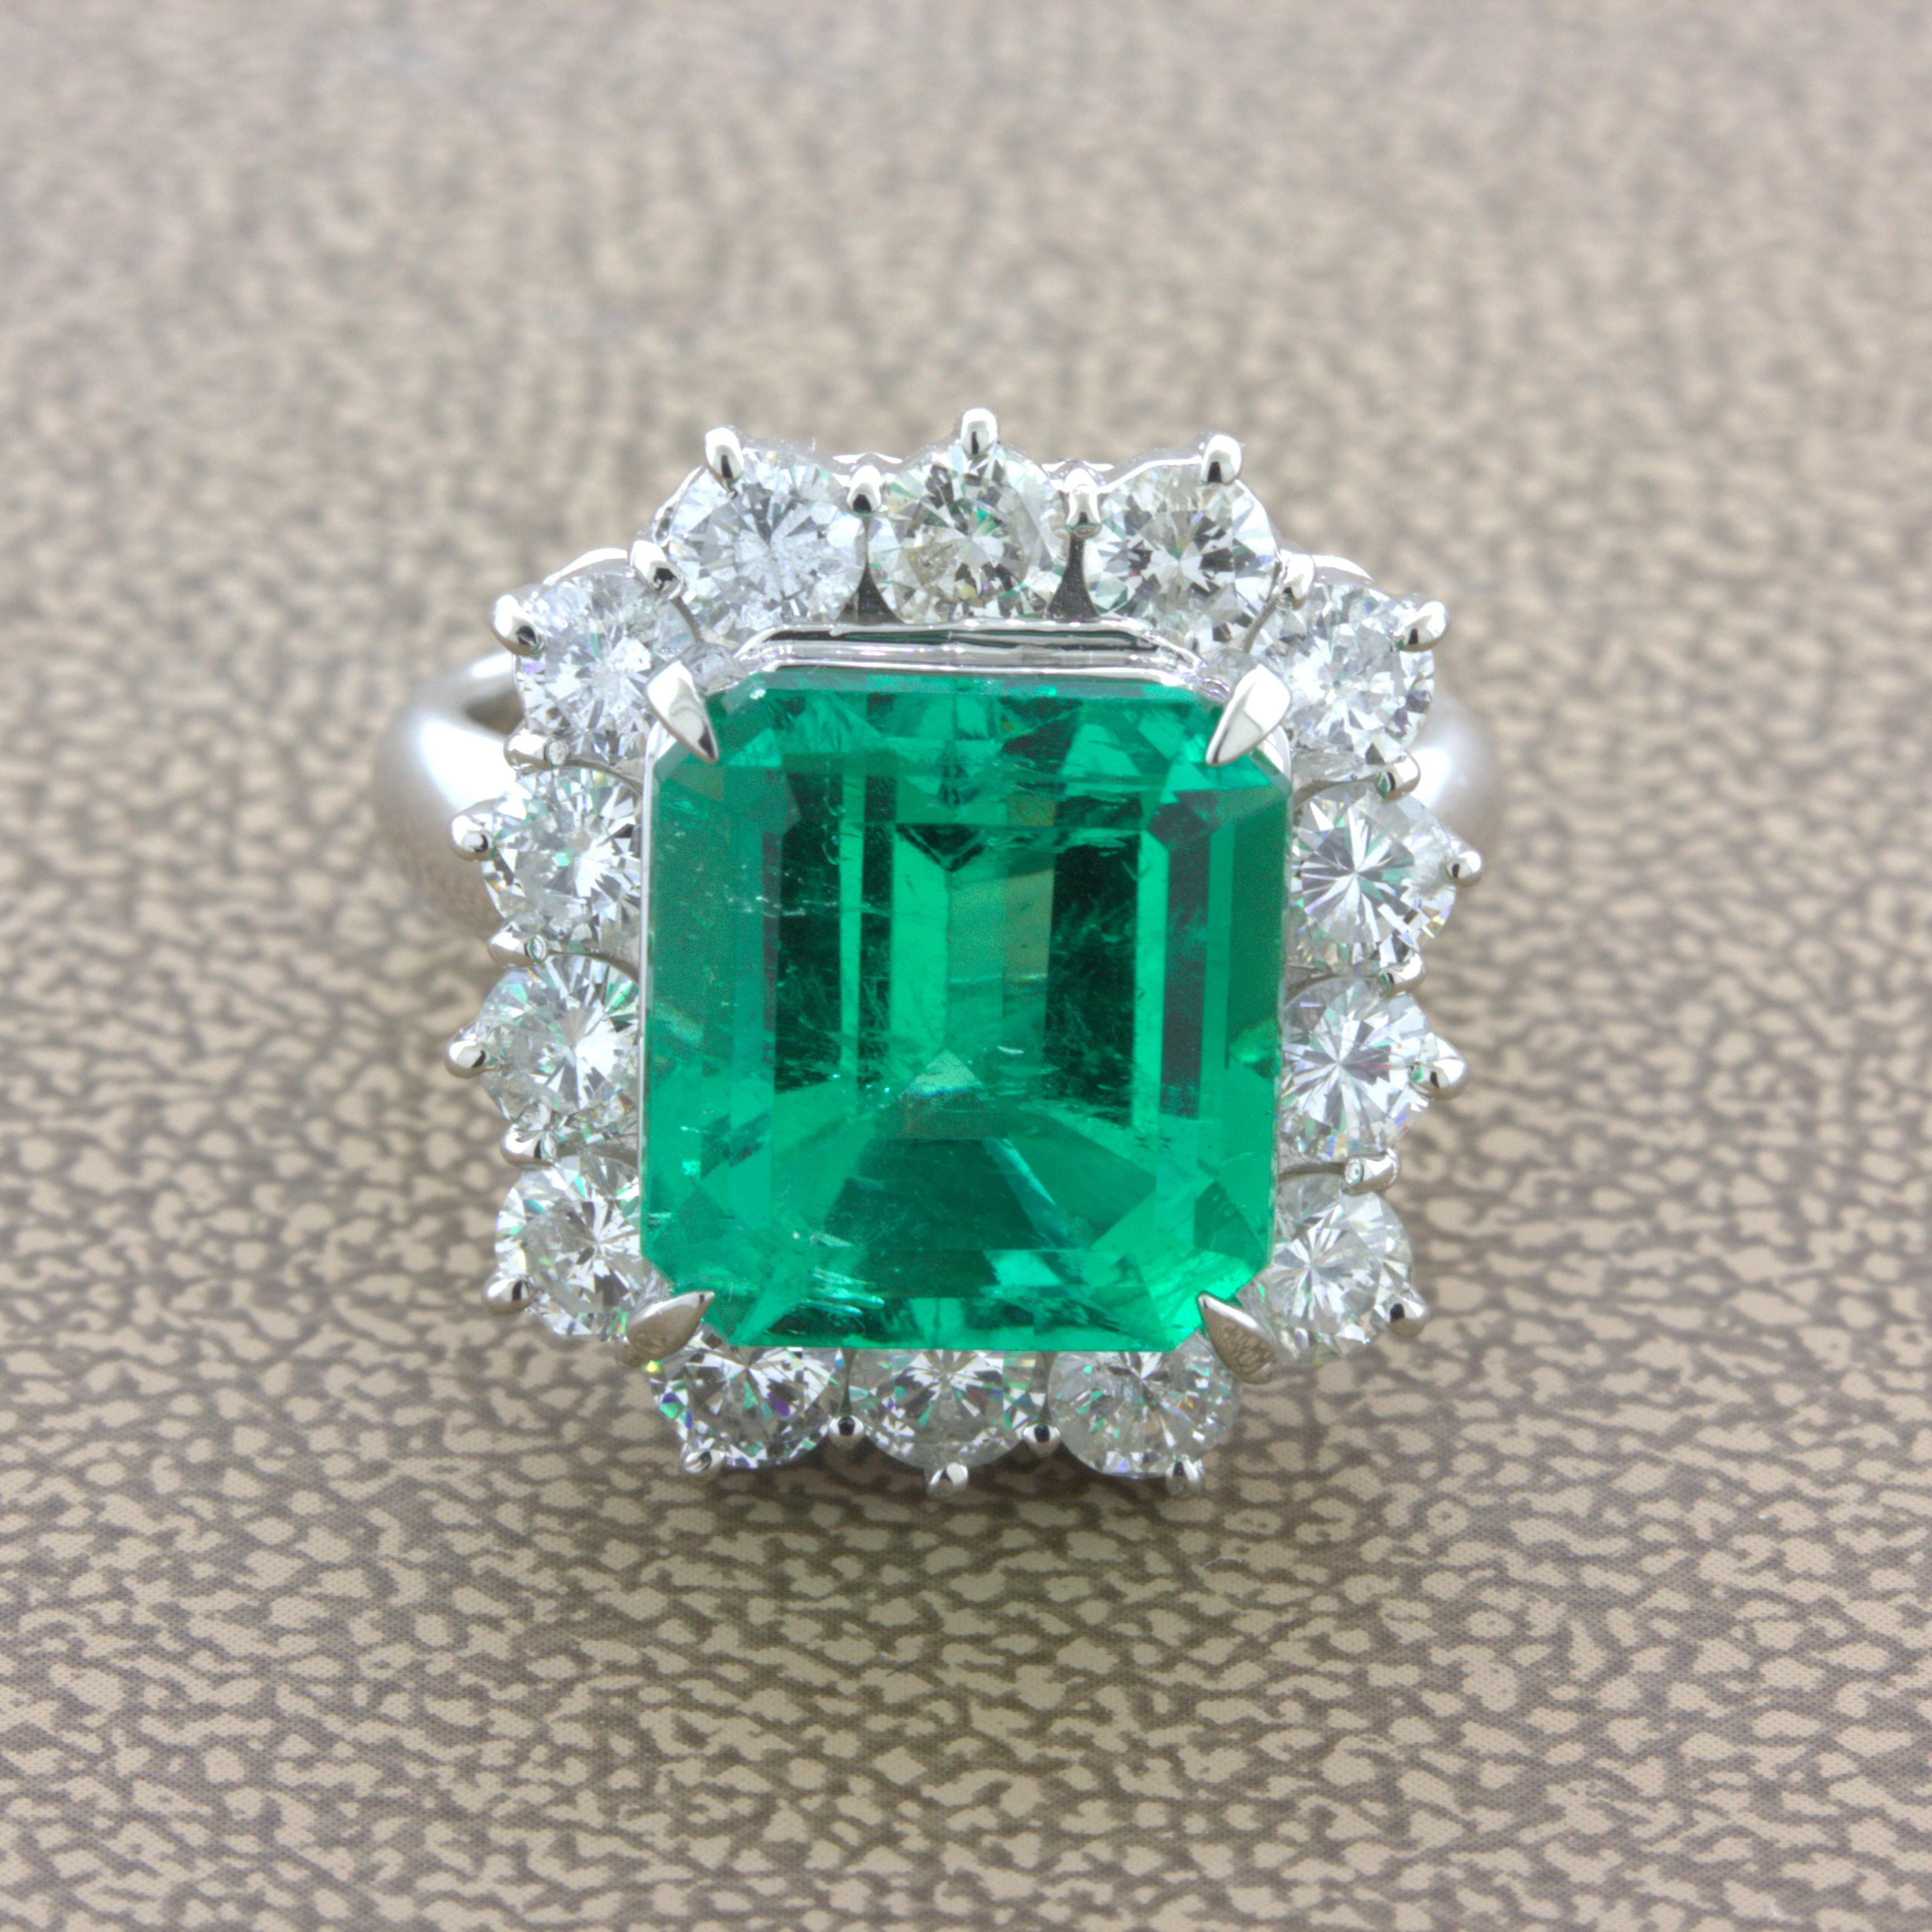 A true top-quality gem Colombian emerald weighing a very impressive 6.12 carats takes center stage. It has a super rich intense green color typical of the best stones from the Muzo region of Colombia. Adding to that, the stone is very clean compared